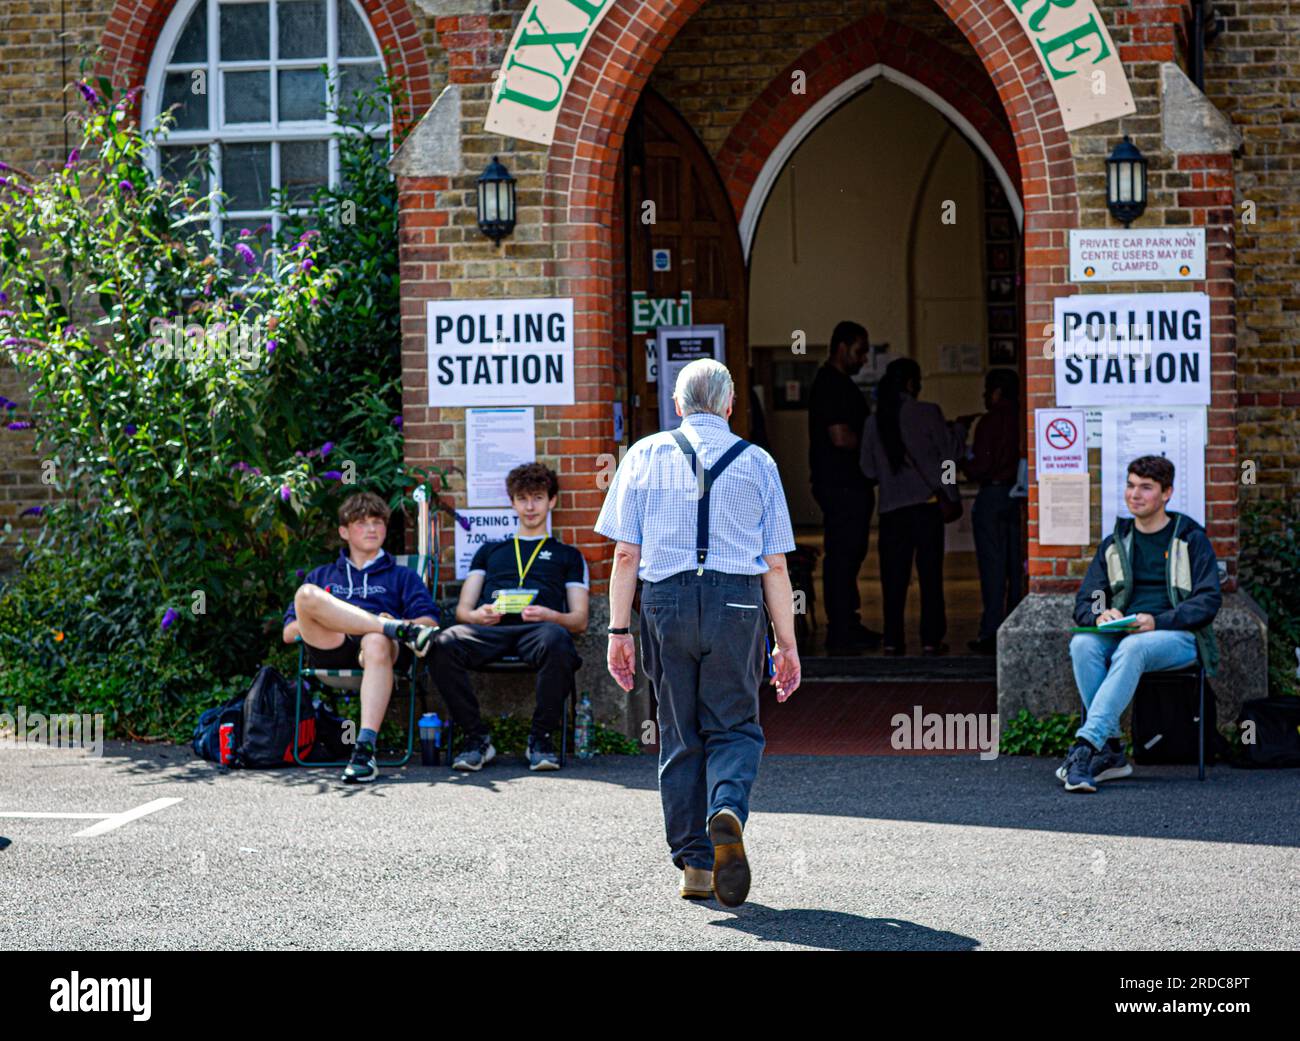 A voter walks in a polling station at the Uxbridge Community Center during a by-election in the northwest London constituency of Uxbridge and South Ruislip on July 20, 2023. Voters headed to the polls in three by-elections across England, with Prime Minister Rishi Sunak's ruling Conservatives braced for defeat in each as inflation-battered Britain's economic woes bite.Credit: Horst Friedrichs/Alamy Live Stock Photo